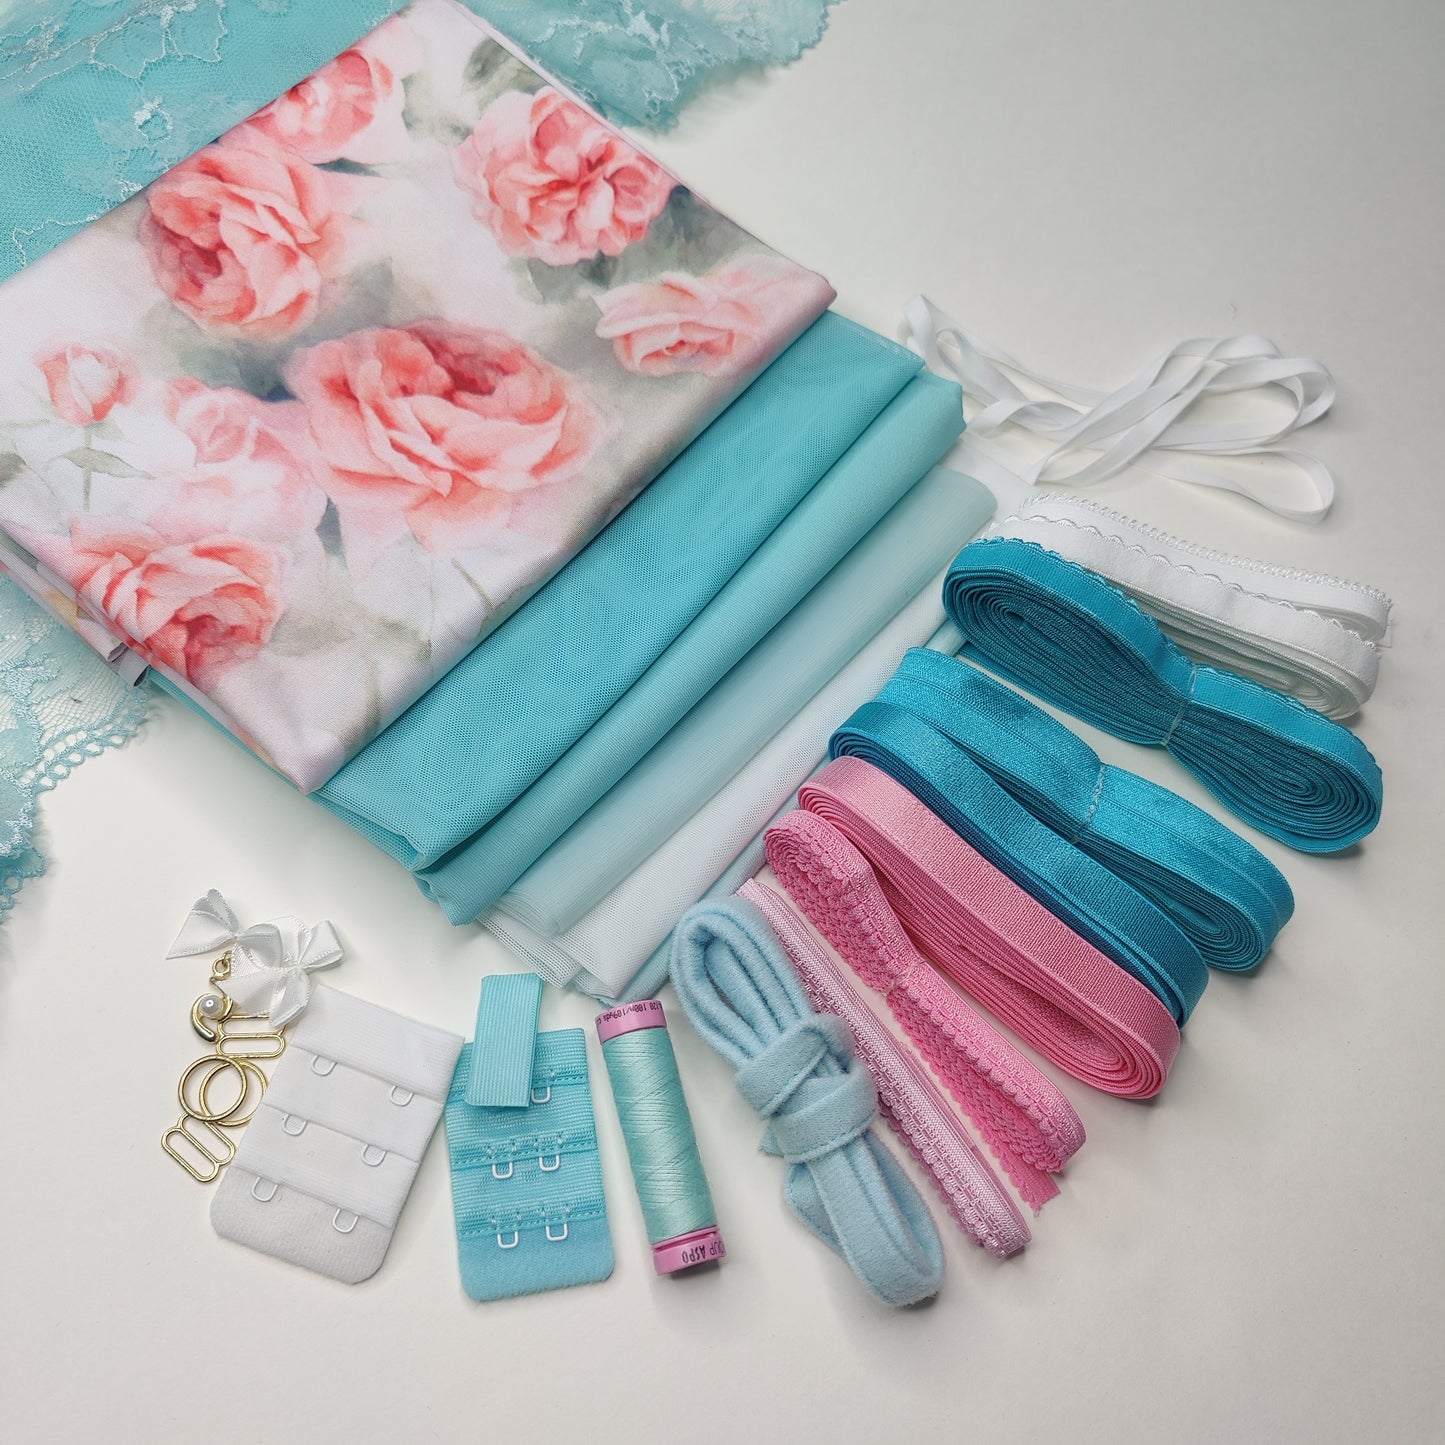 Large sewing set for 2x bras and panties or sewing package with <tc>lace</tc>, microfiber and Powernet in mint green. IDnsx1